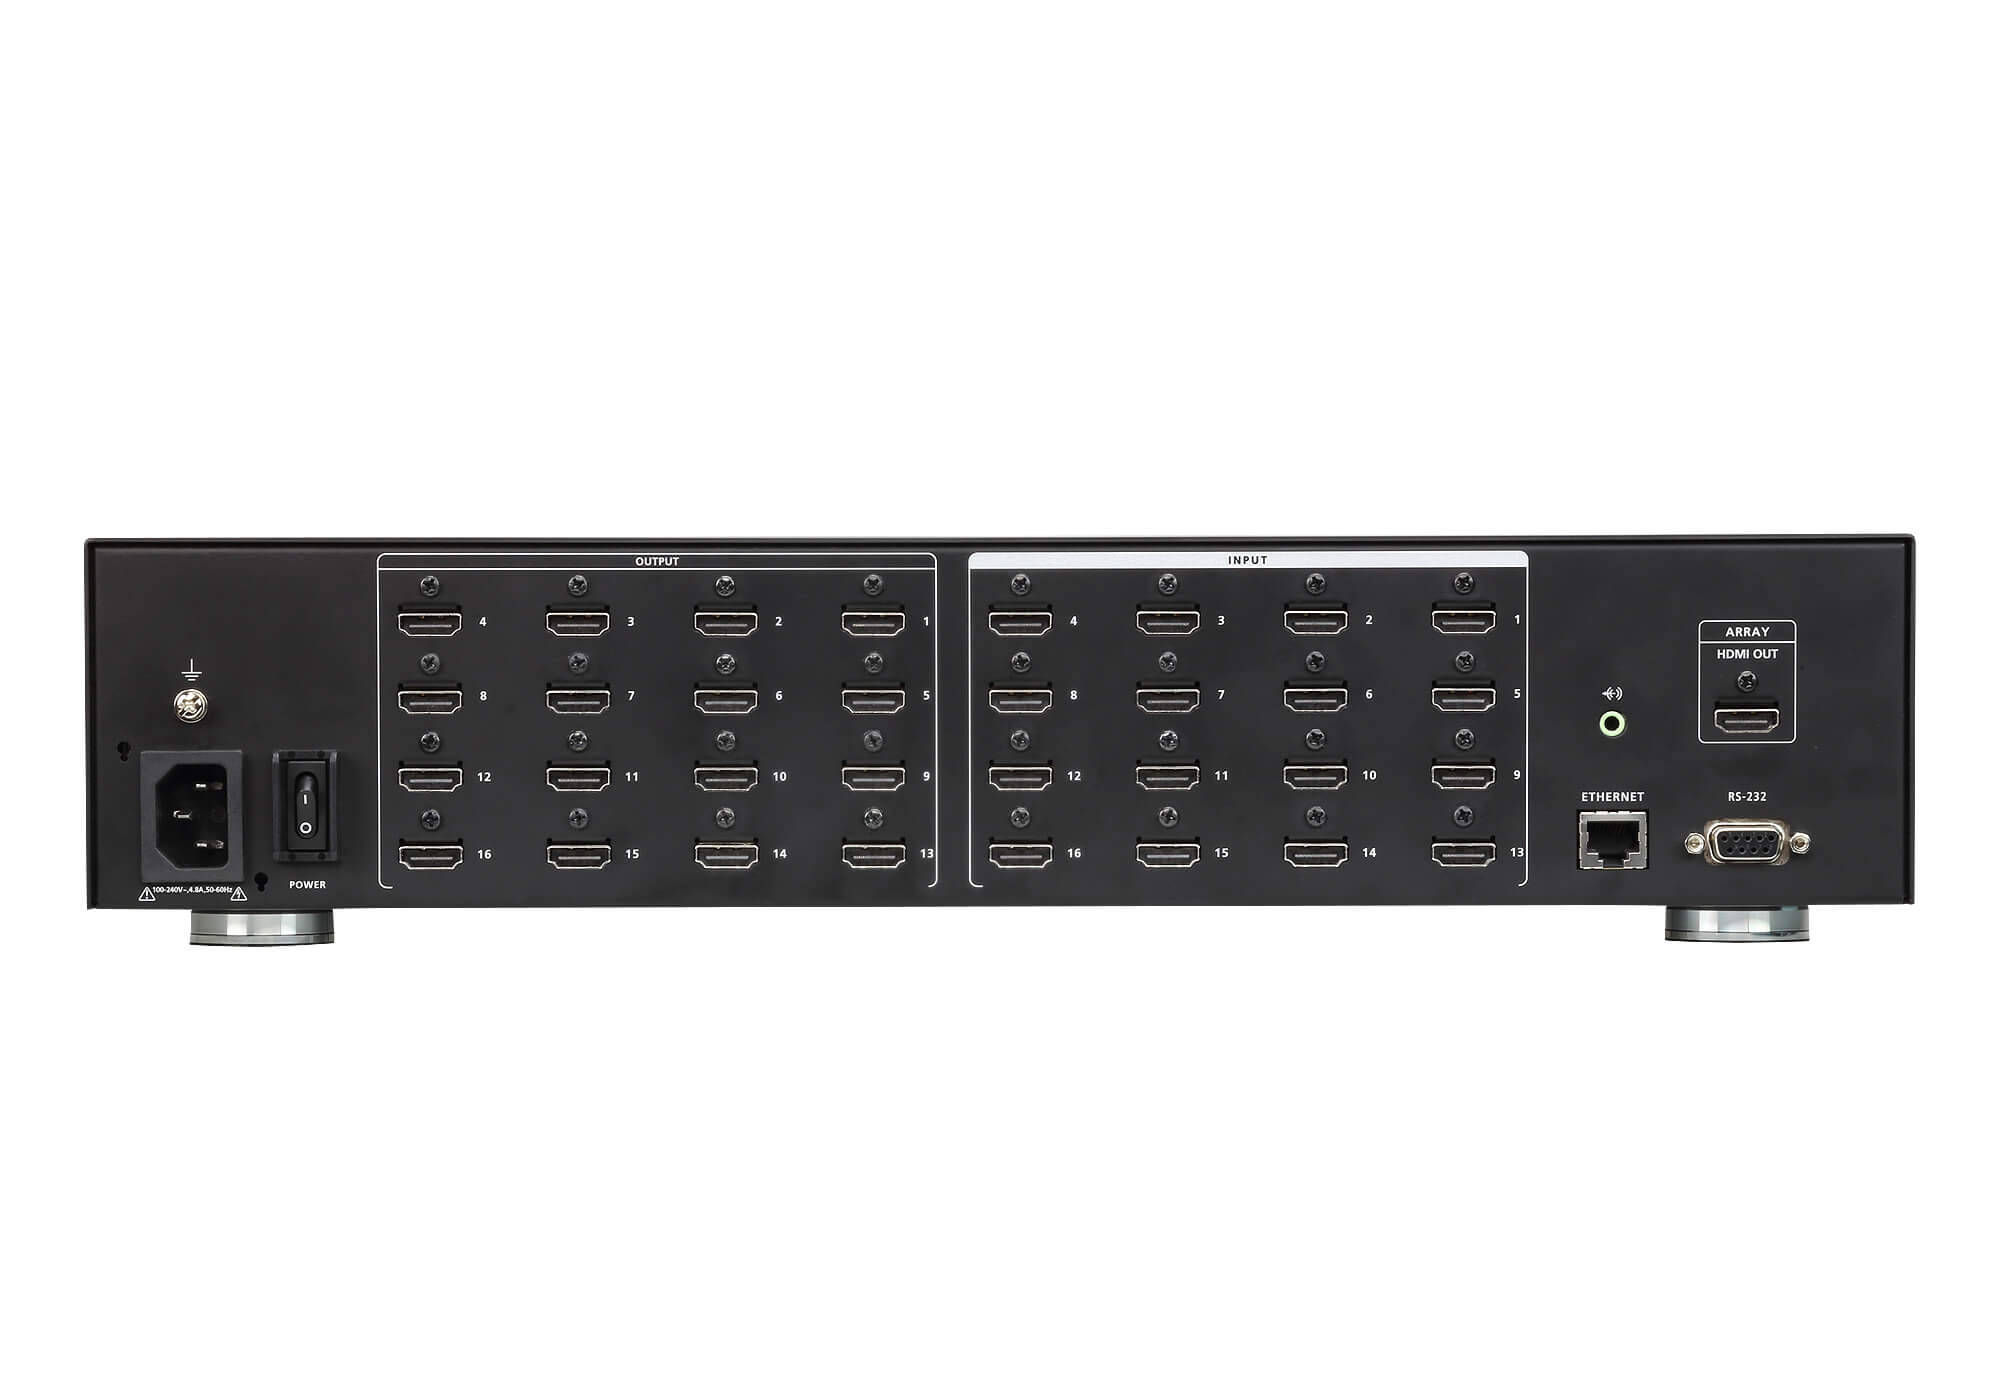 Aten Professional Matrix 16×16 HDMI Matrix with Scaler, Seamless Switch, control via front-panel pushbuttons